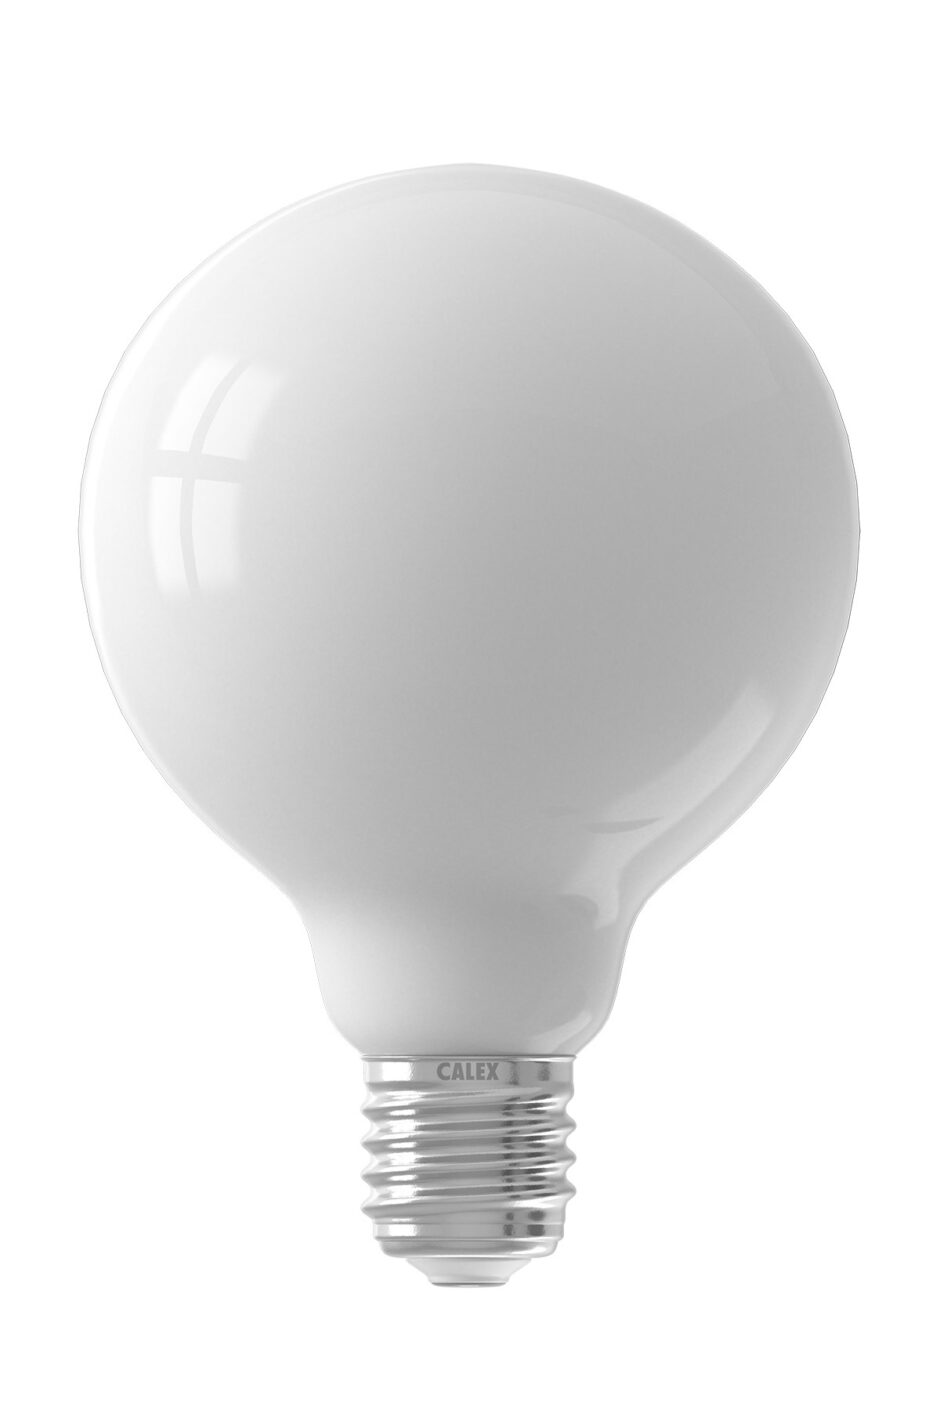 CALEX – LED (Milky) – E27 – DIMMABLE – 900Lm – 8W